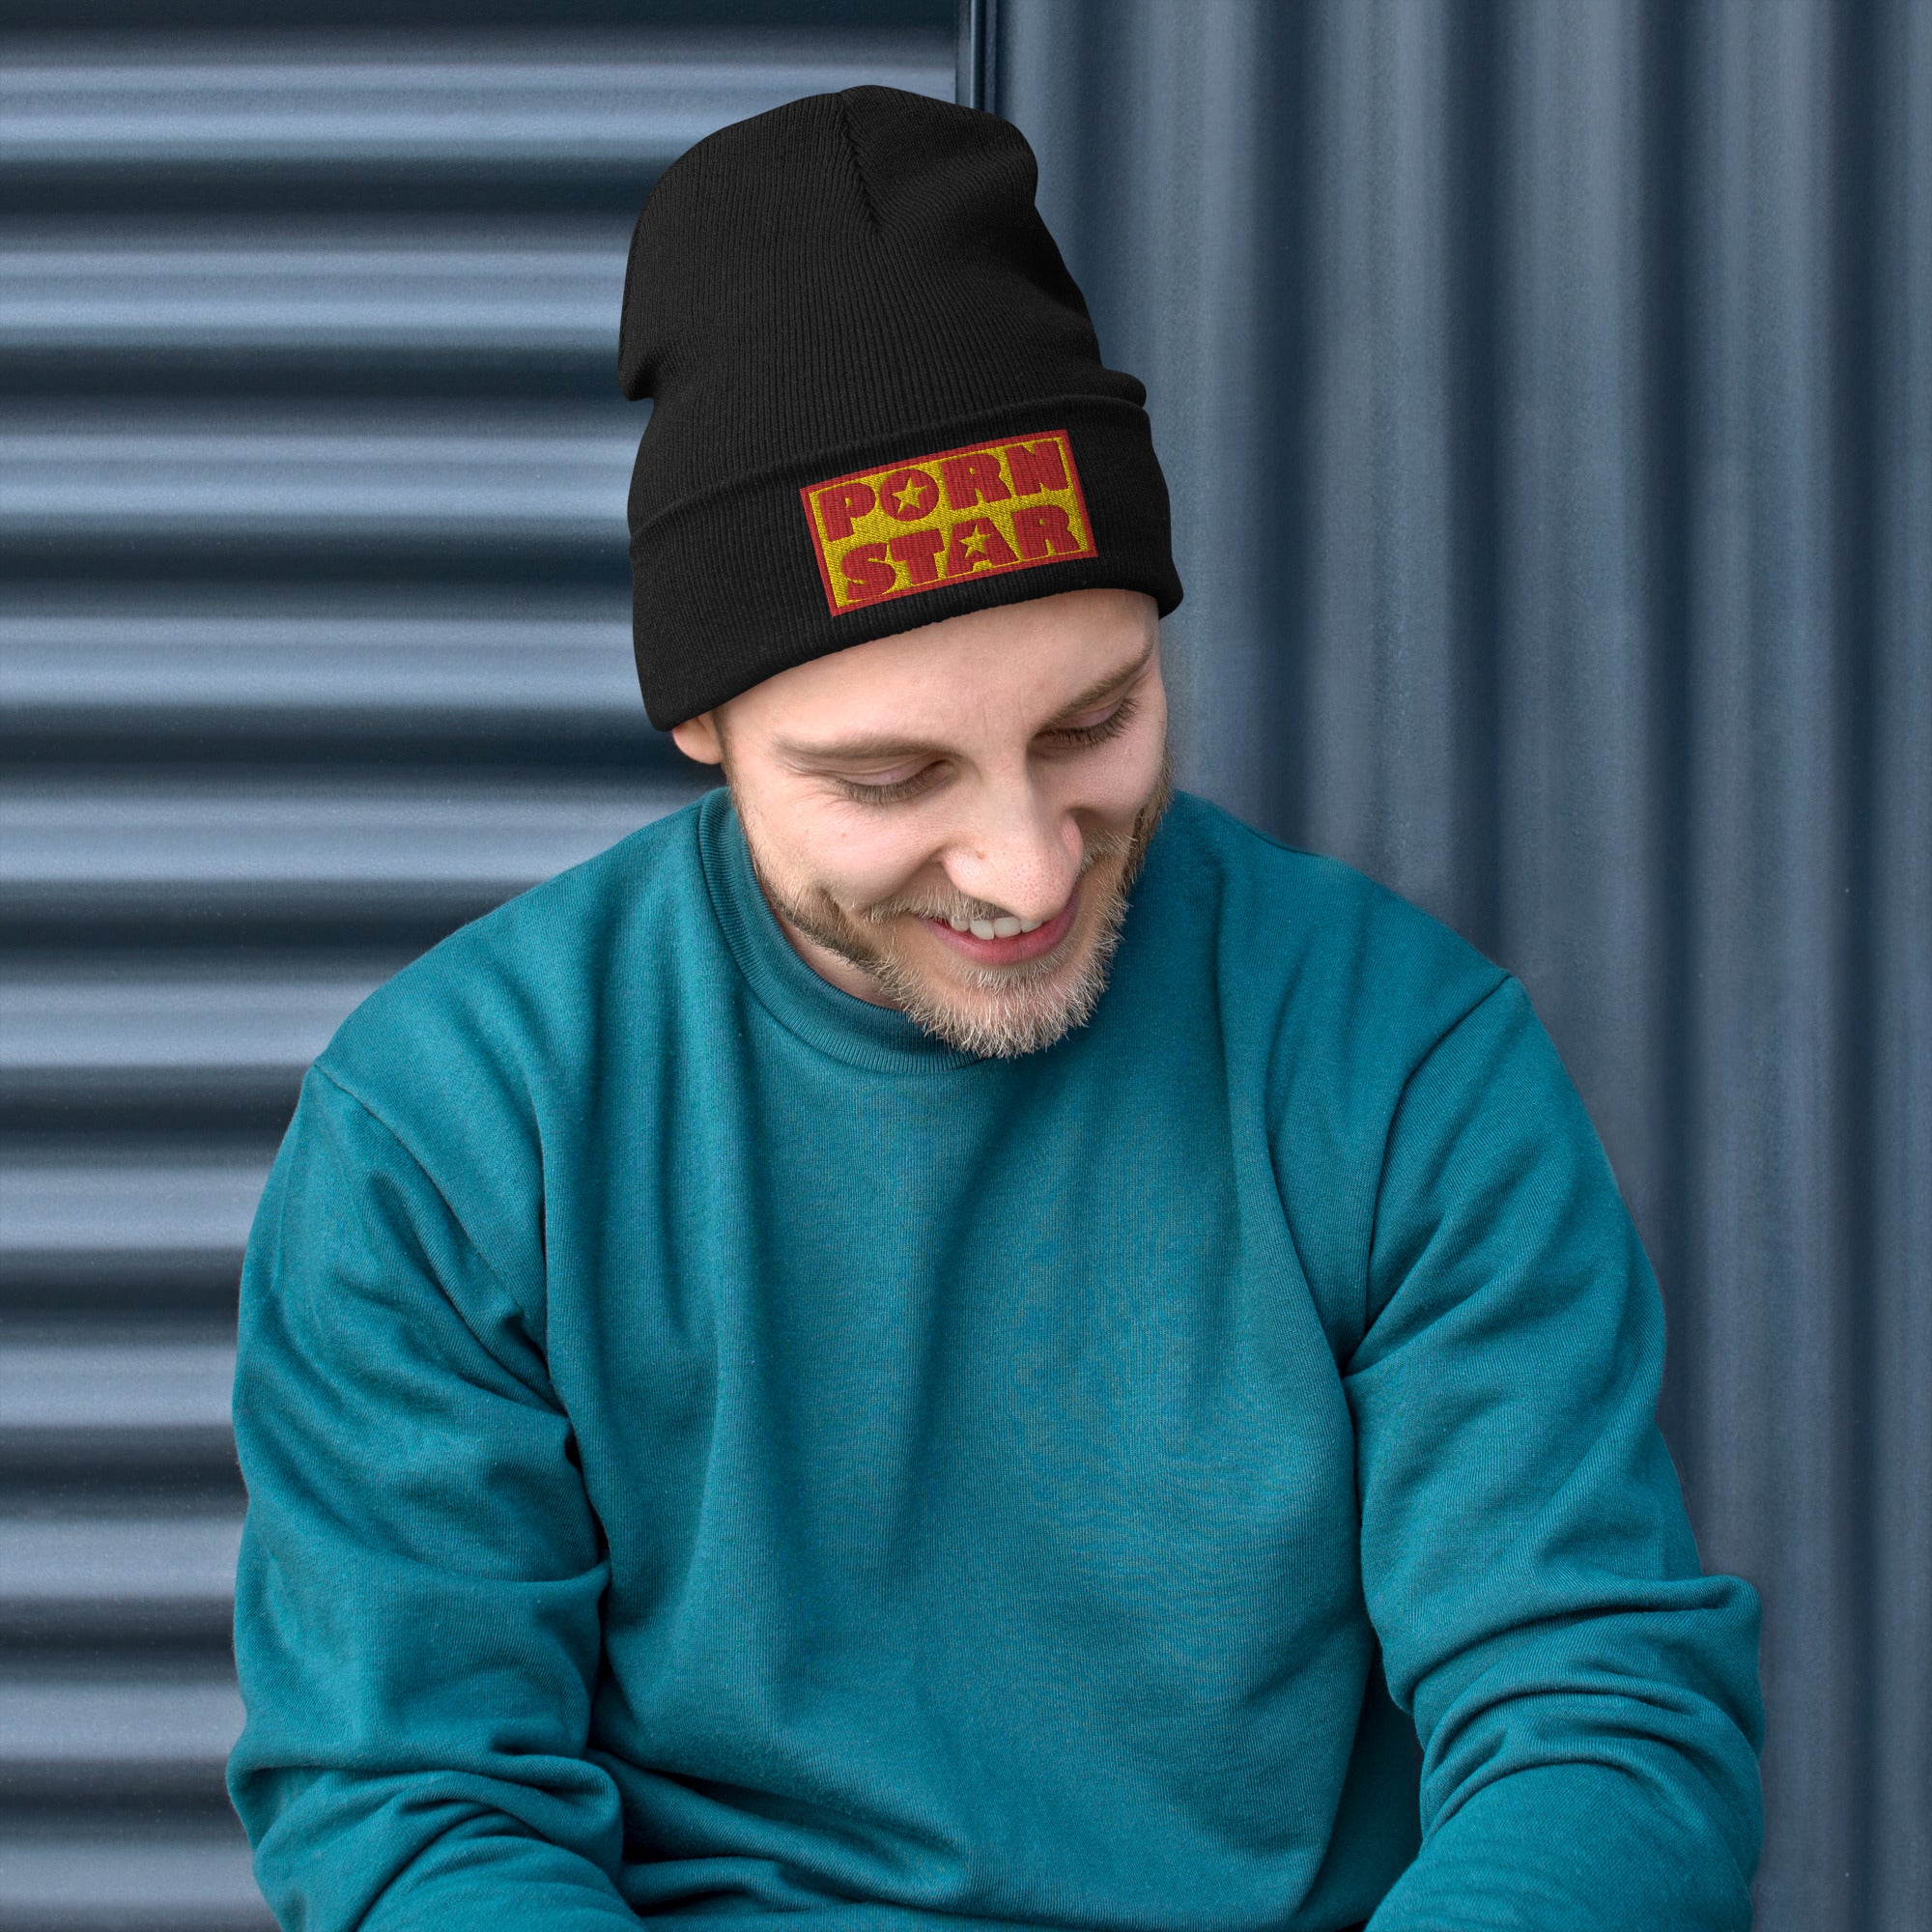 Porn Star Logo Embroidered Cuff Beanie Red and Yellow - Edge of Life Designs